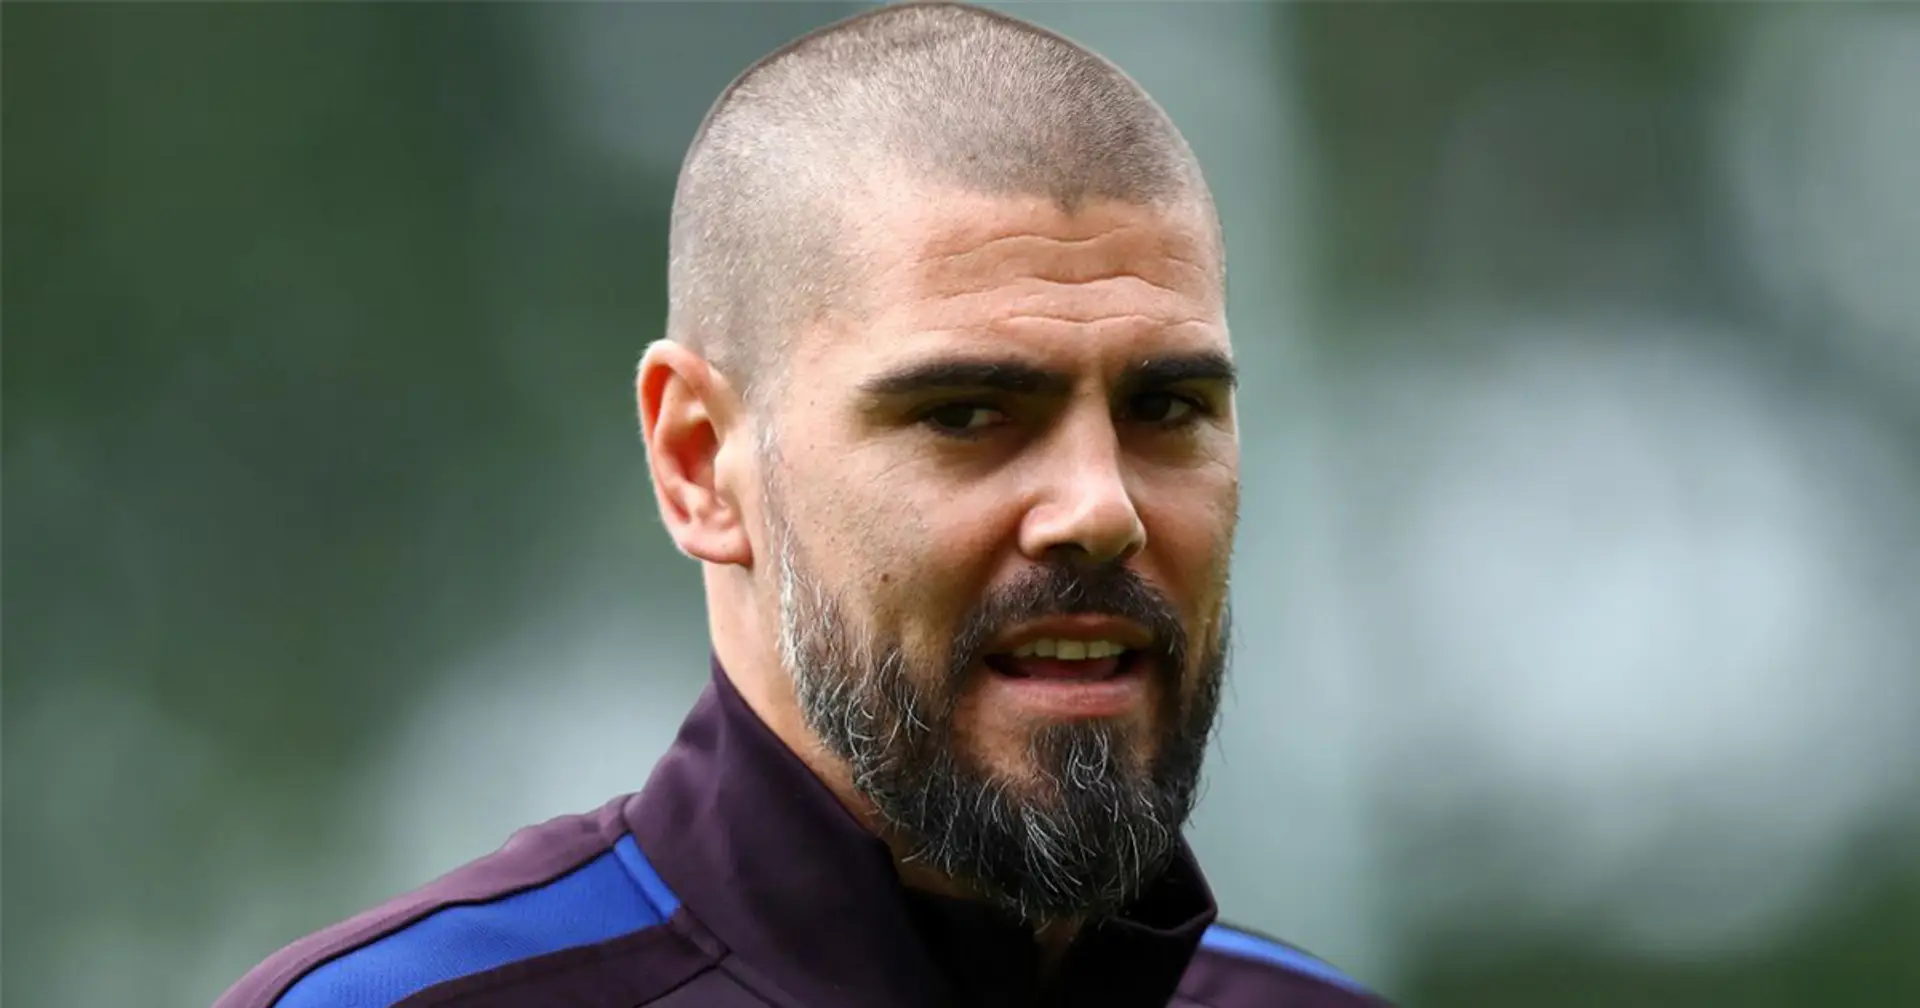 Mayhem continues: Victor Valdes sees red card in first coaching experience with Horta